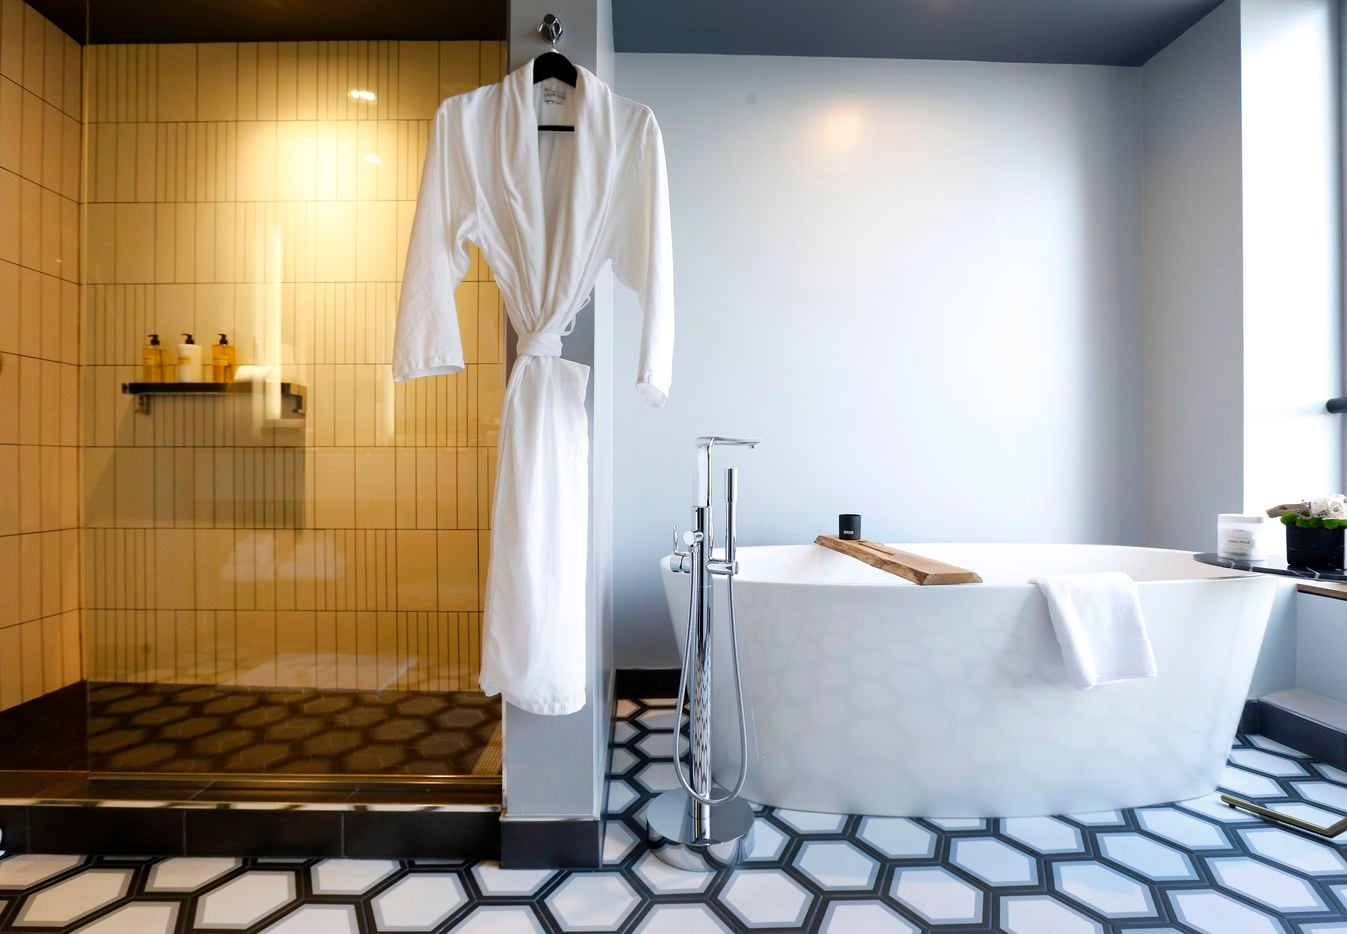 A tub and walk-in shower in the 219-room Thompson Dallas luxury hotel.